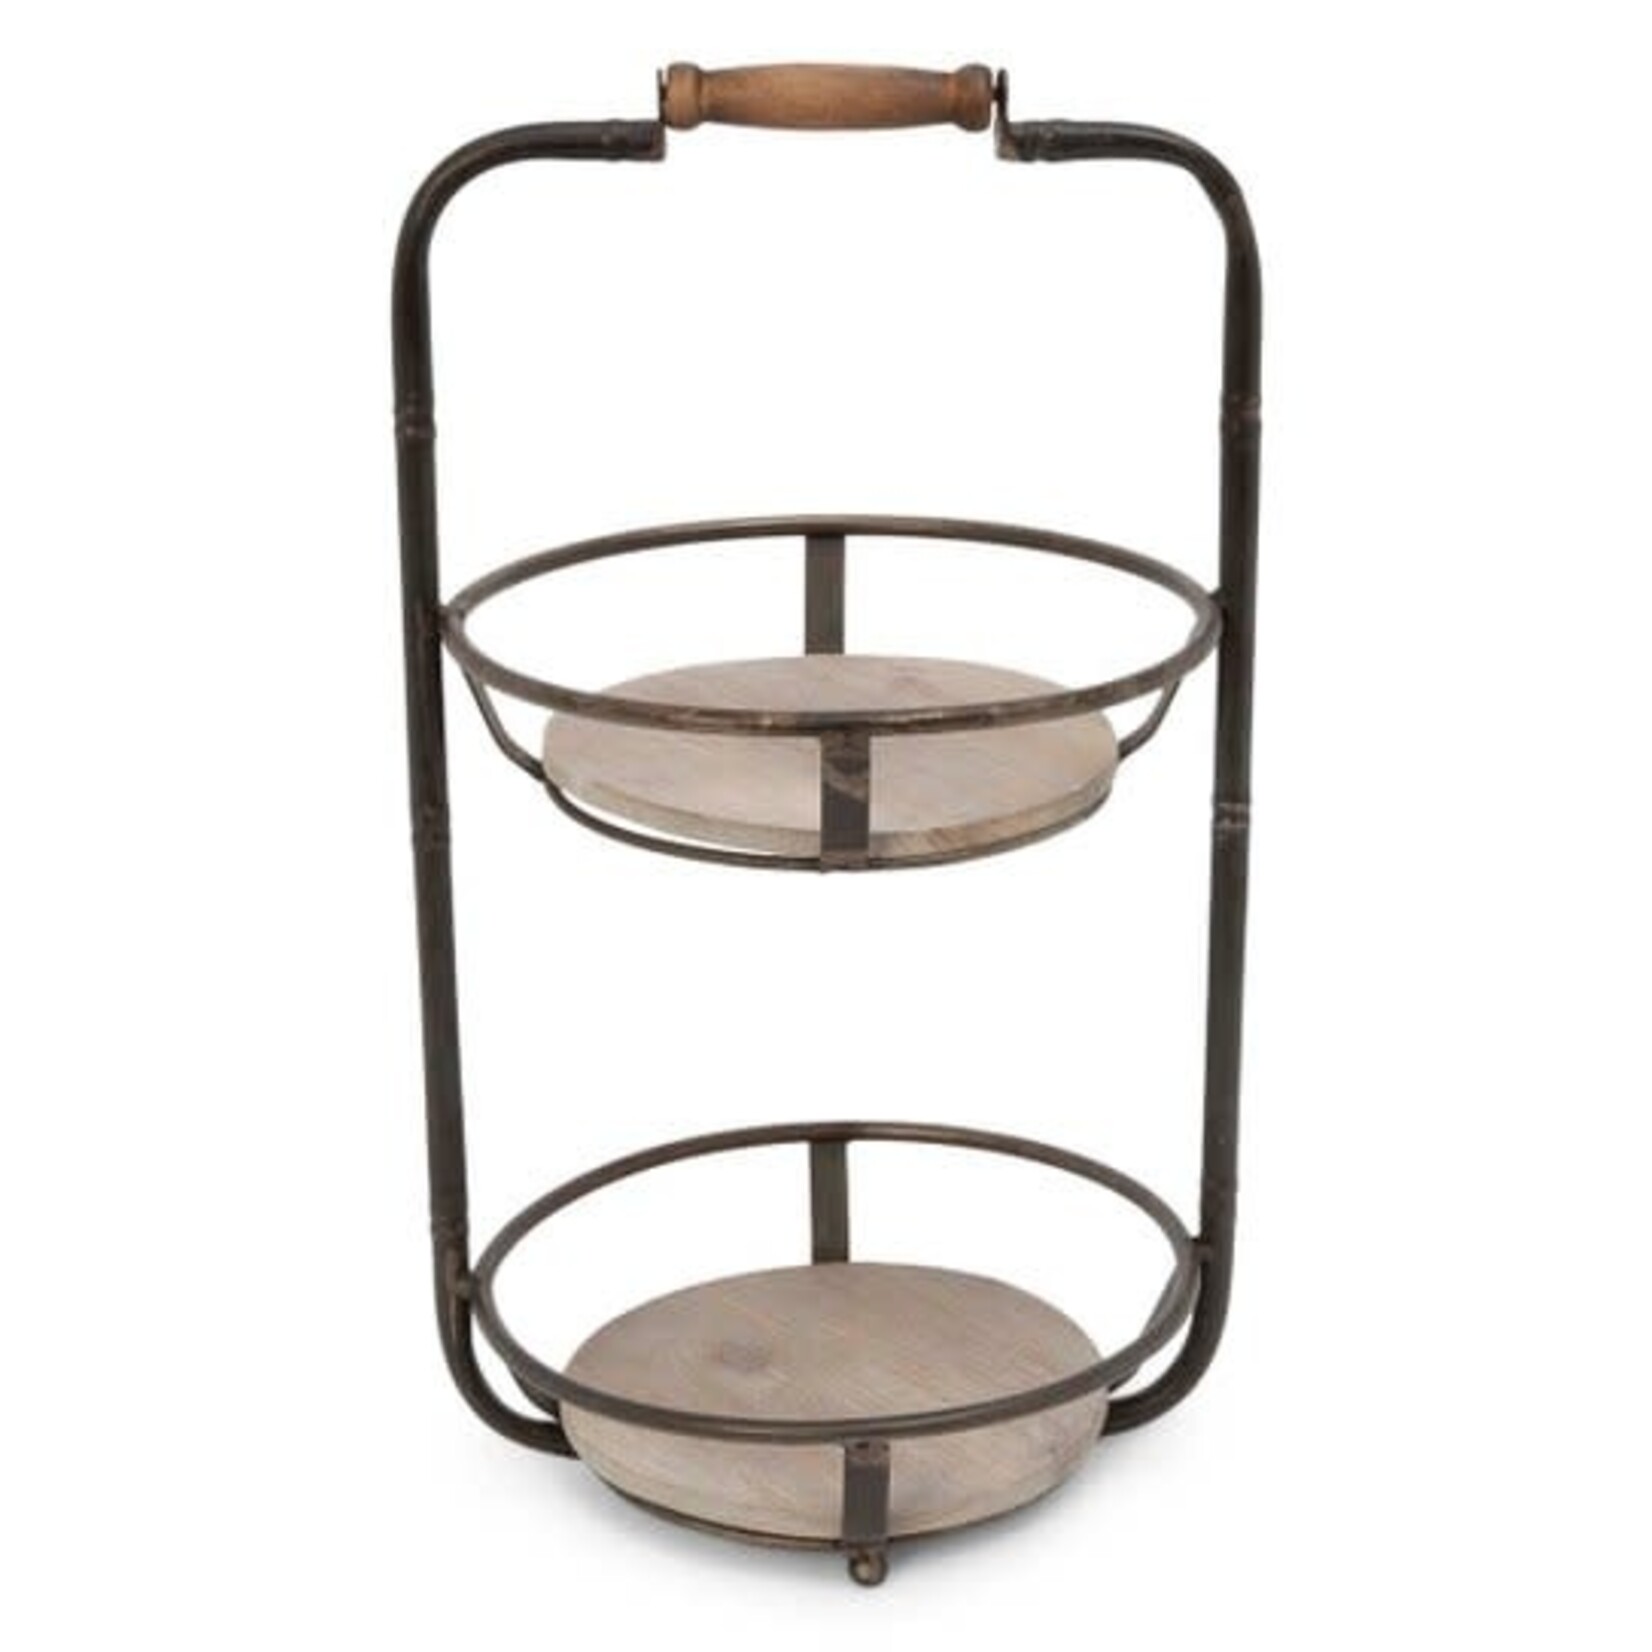 Gerson Wood & Metal Plant Stand